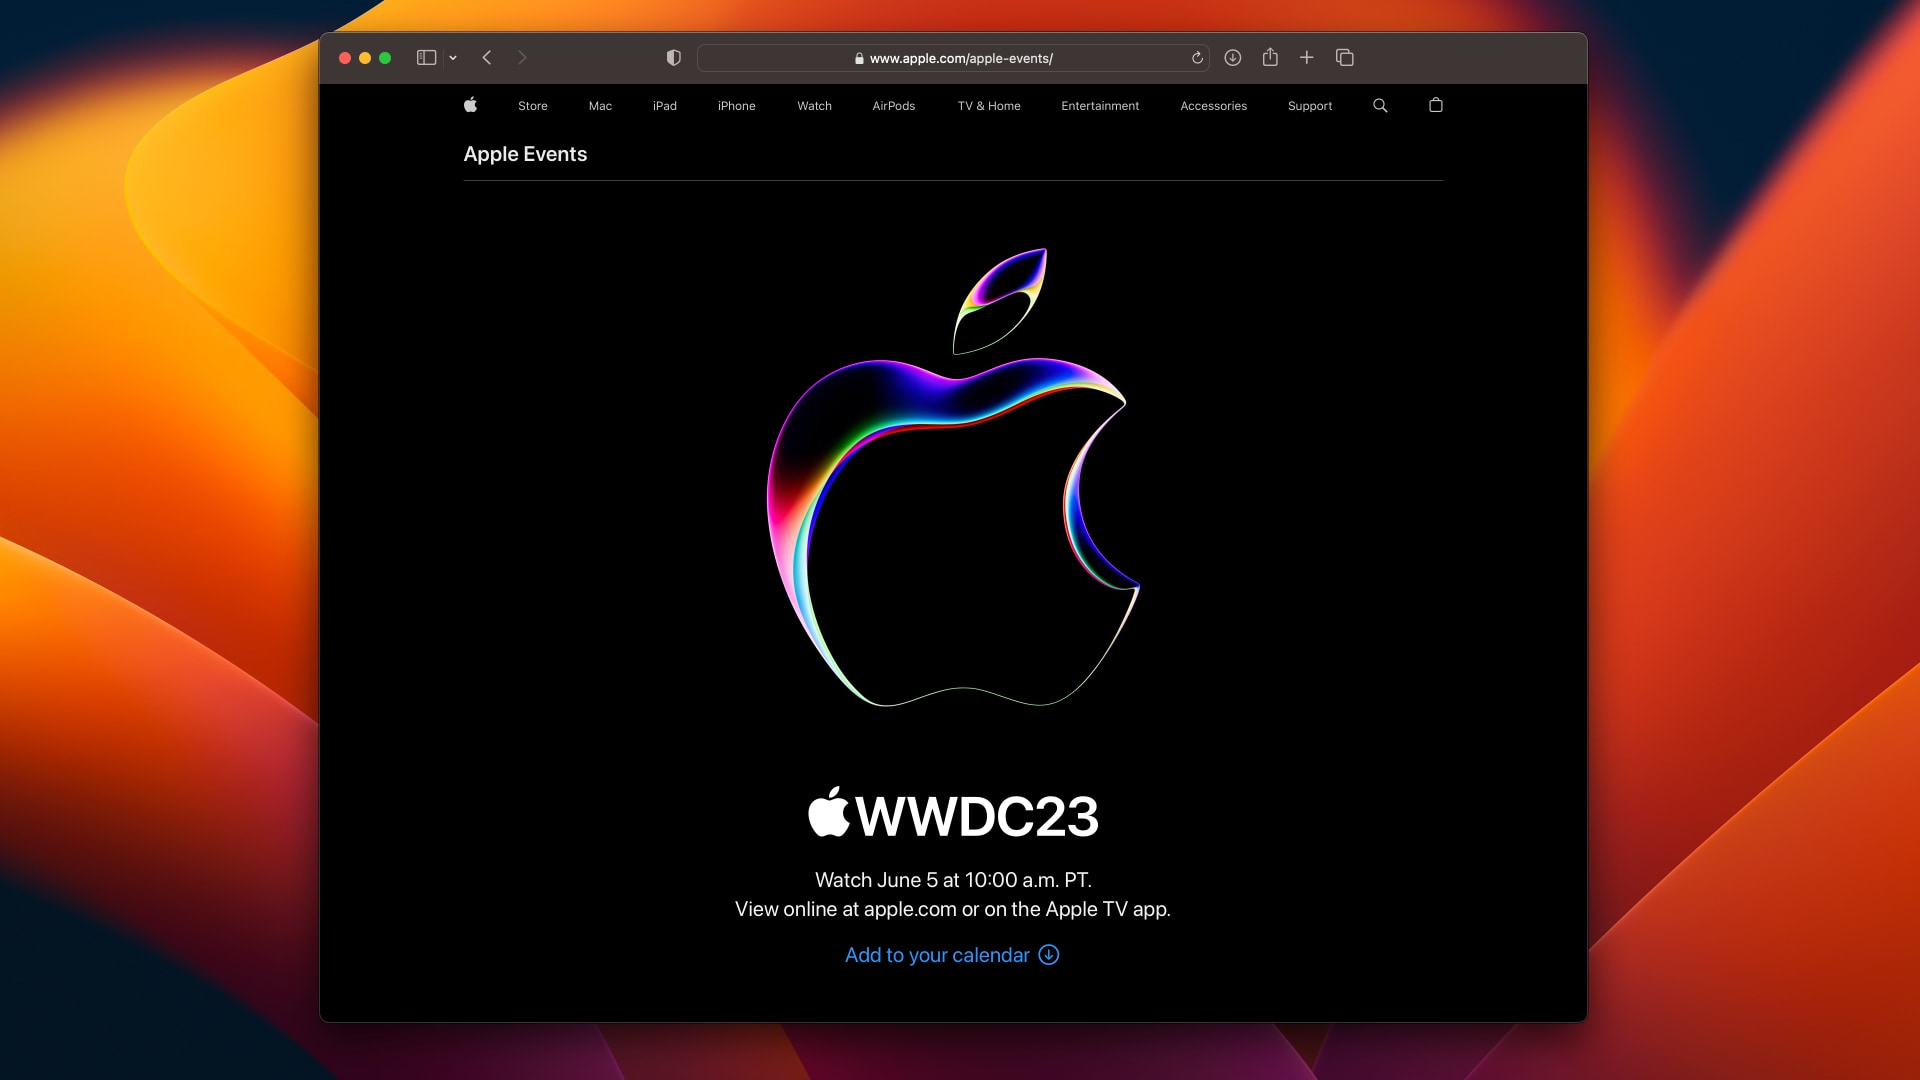 The WWDC 2023 section on the Apple Events page in Safari for Mac